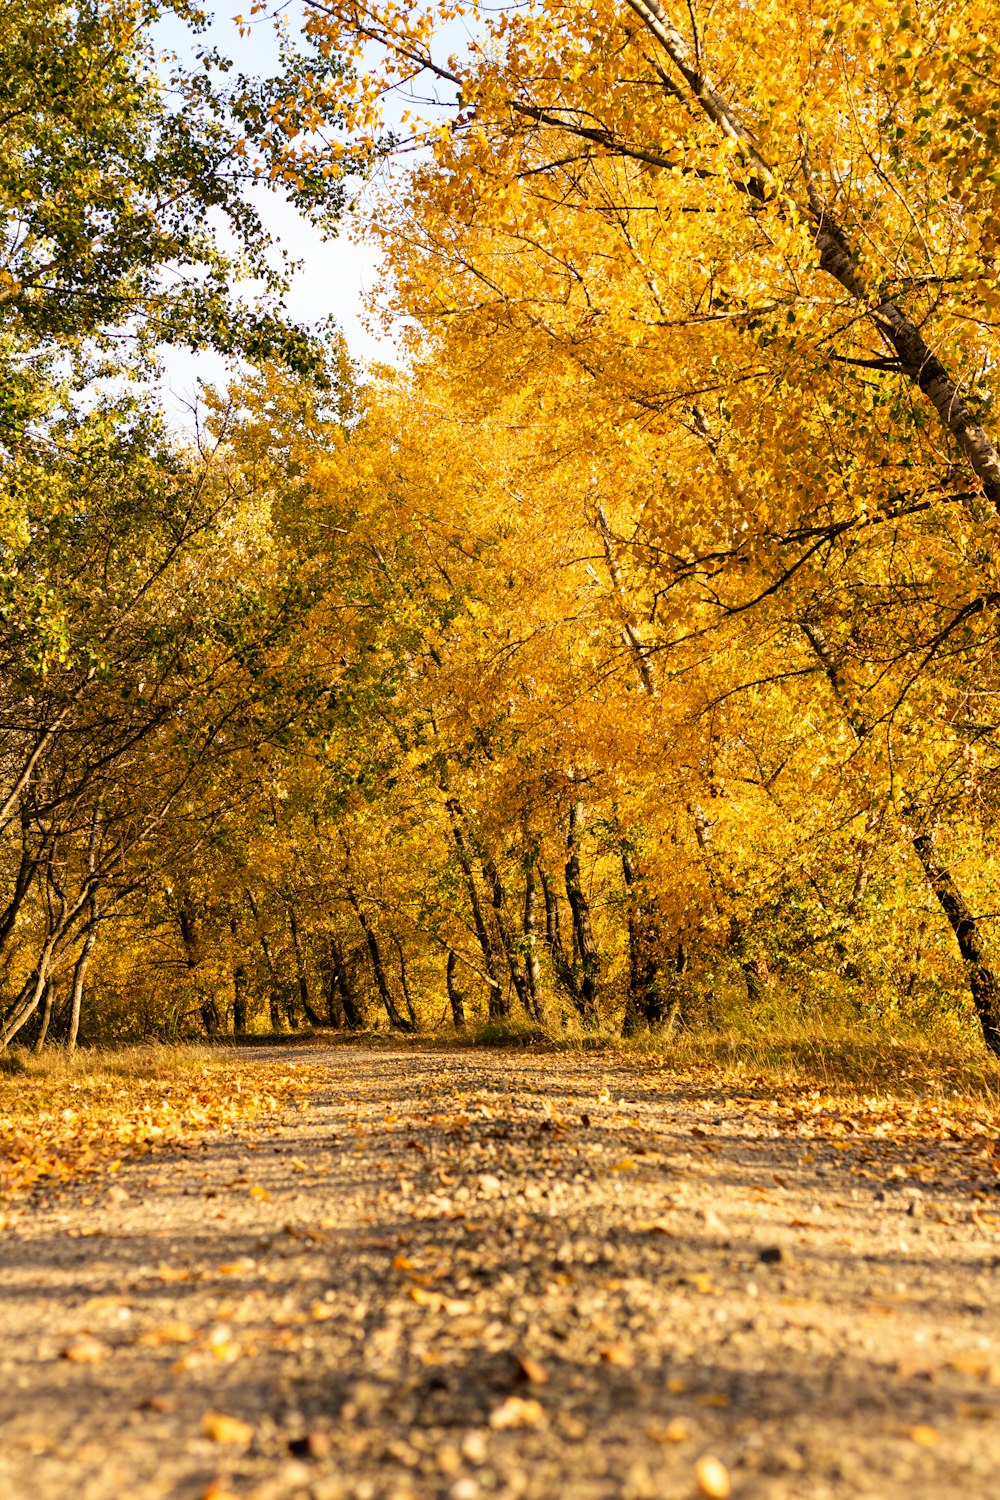 a dirt road surrounded by trees with yellow leaves